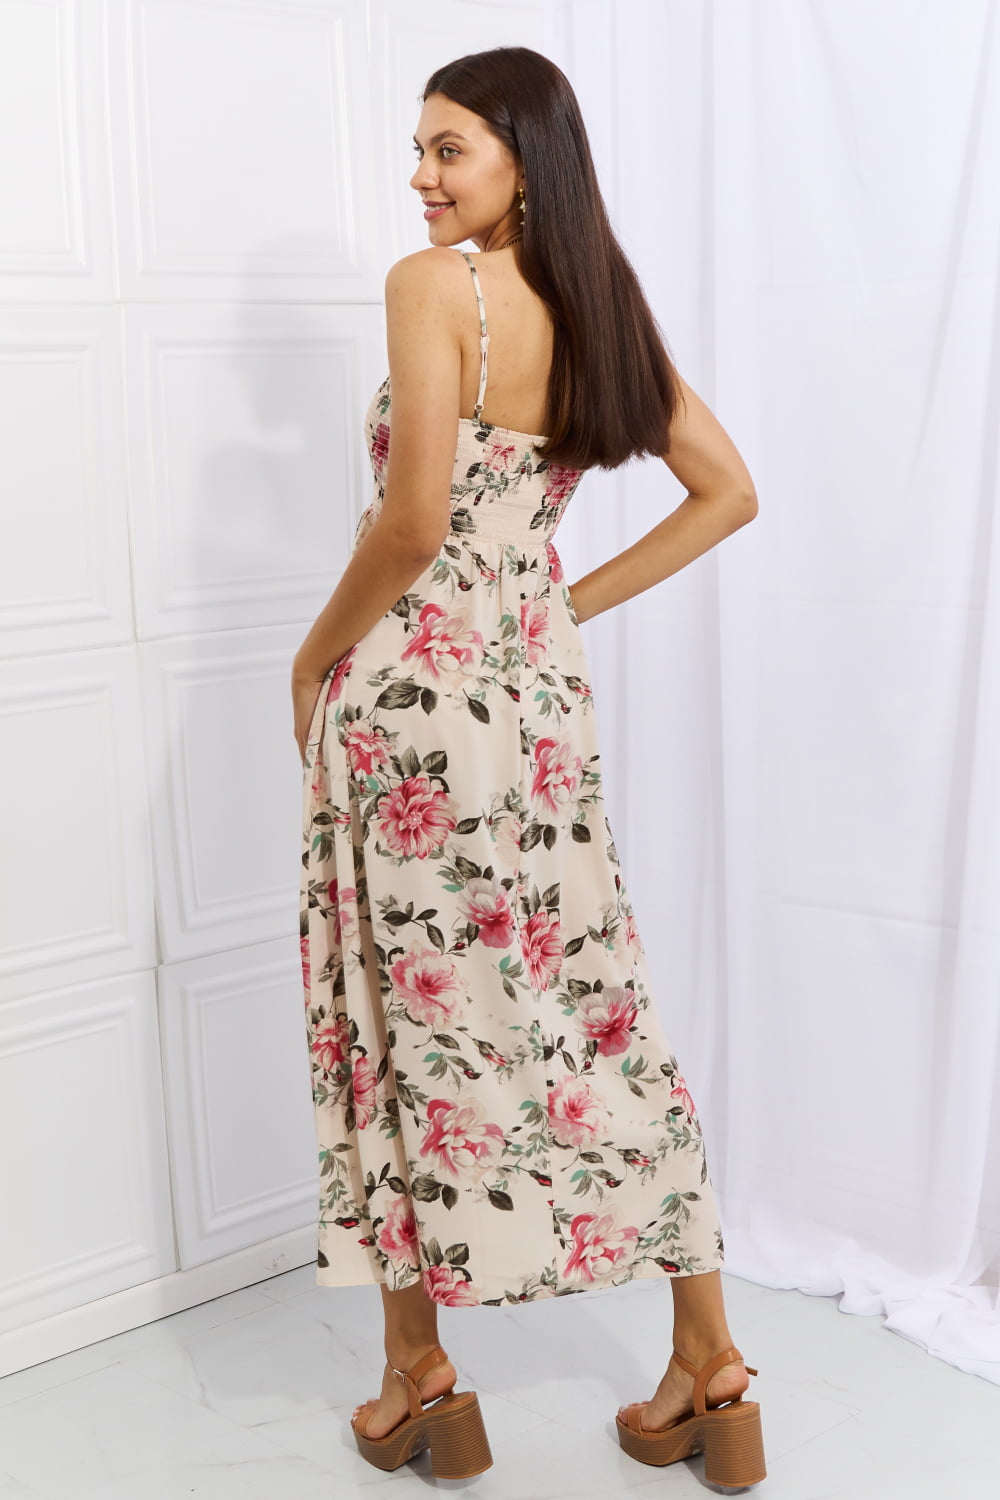 Light Gray OneTheLand Hold Me Tight Sleevless Floral Maxi Dress in Pink Sentient Beauty Fashions Apparel & Accessories